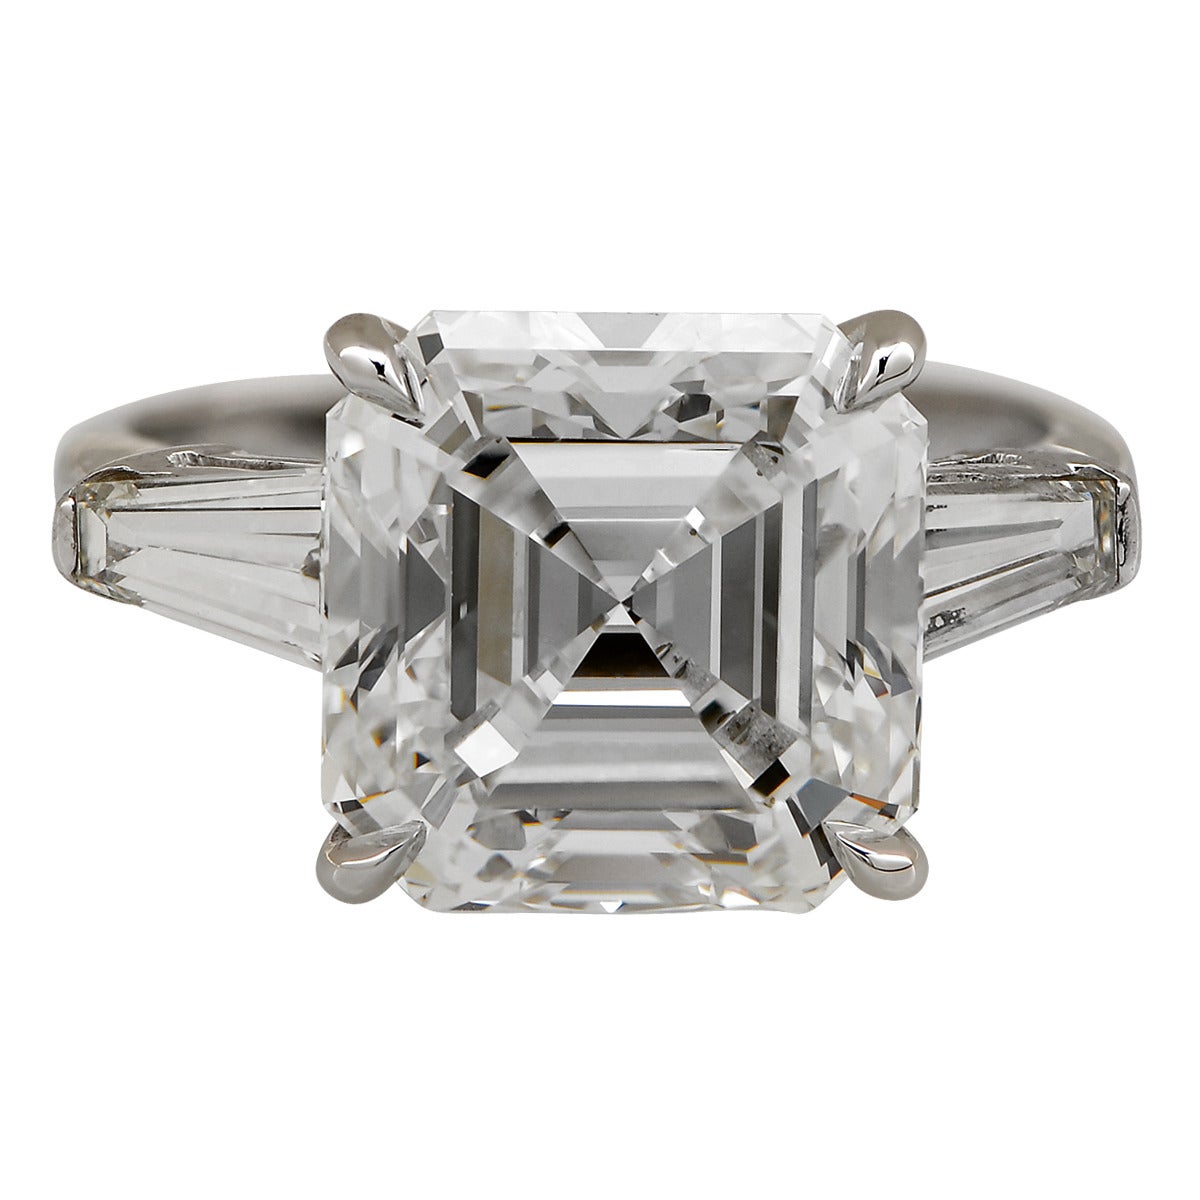 This gorgeous 7.15ct square emerald cut, I color, VS1 clarity, GIA graded diamond is flanked by 2 emerald cut diamonds weighing approximately 1.40cts, H color, VS clarity, and is set in an Aletto signed platinum ring.

Ring size: 4.5
Metal